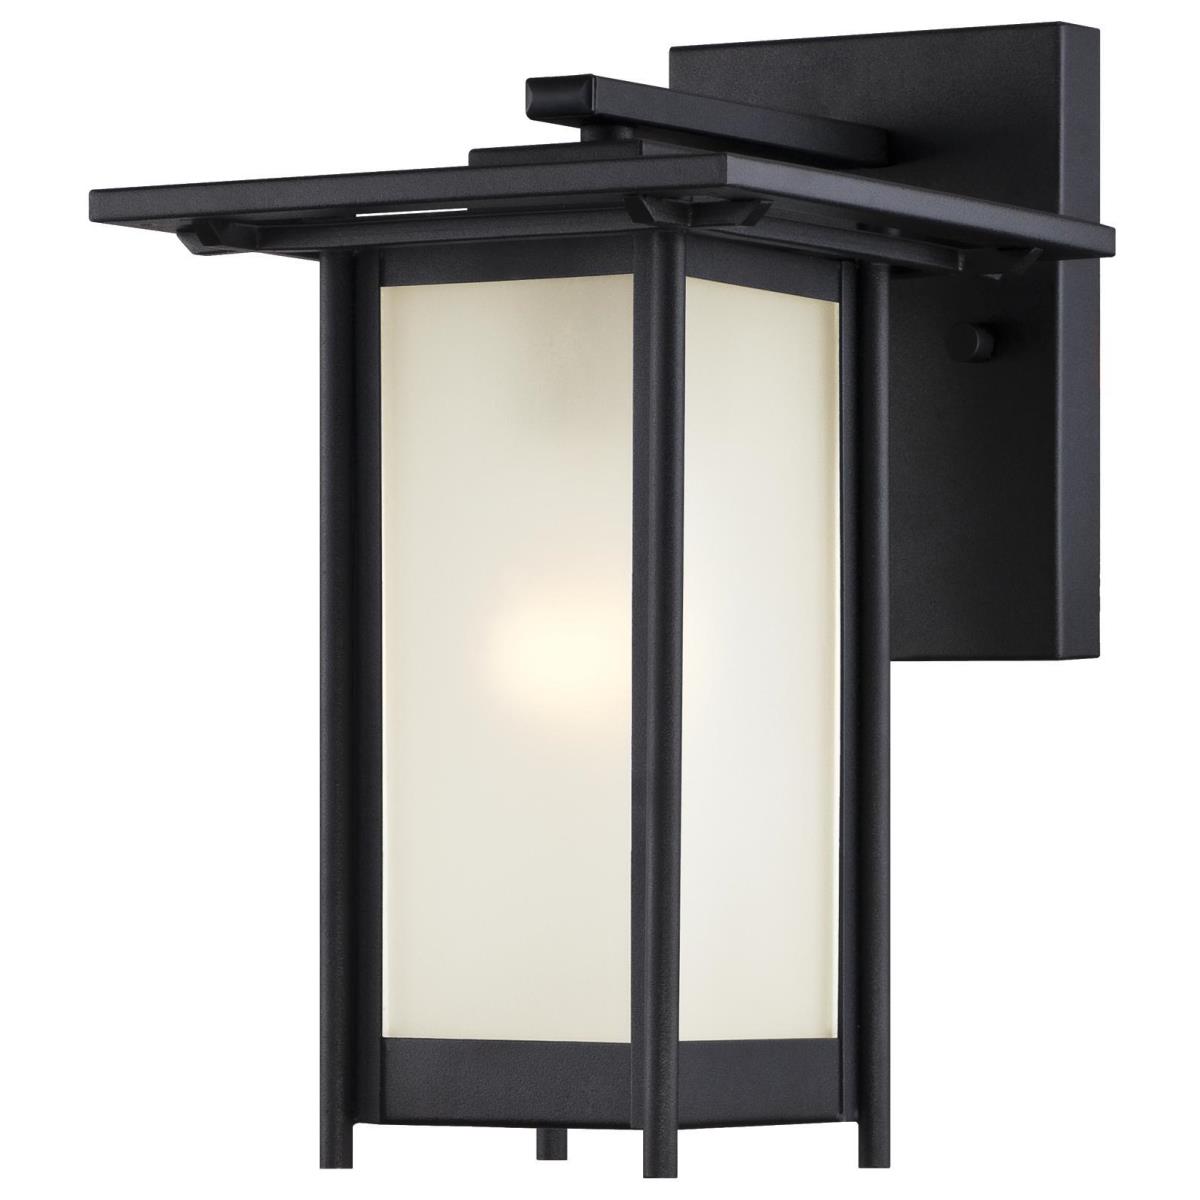 1 Light Wall Fixture Textured Black Finish with Frosted Glass